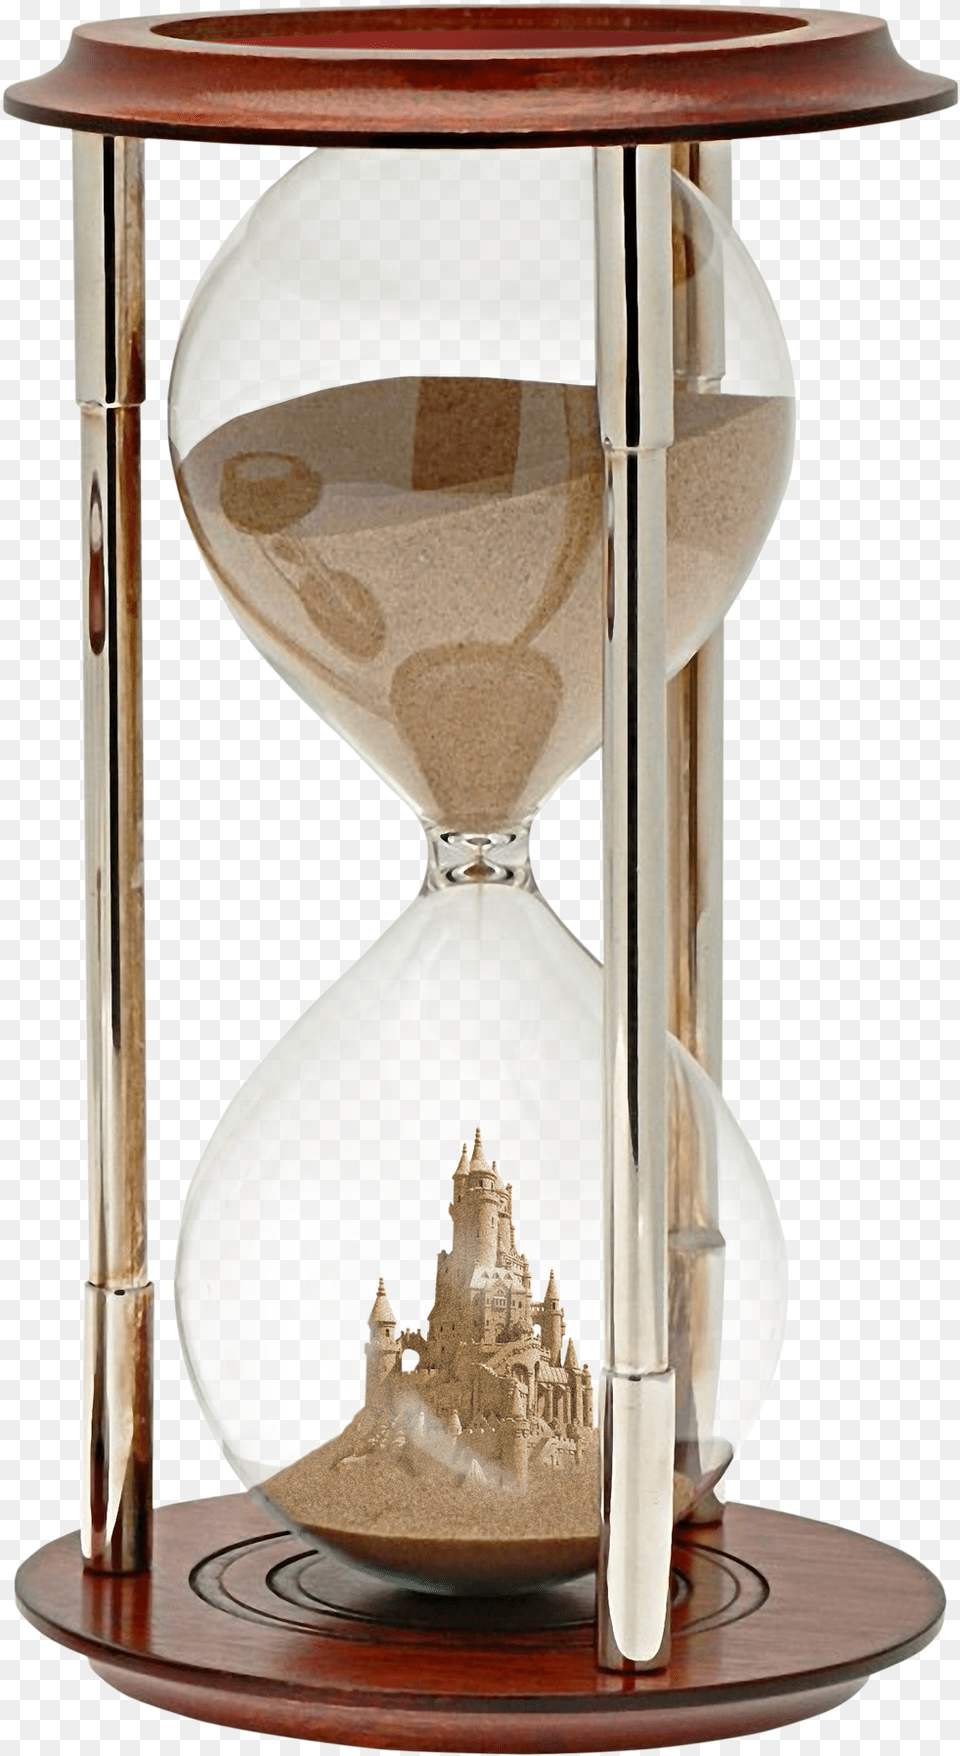 Best Stock Sand Clock Transparent, Hourglass Png Image